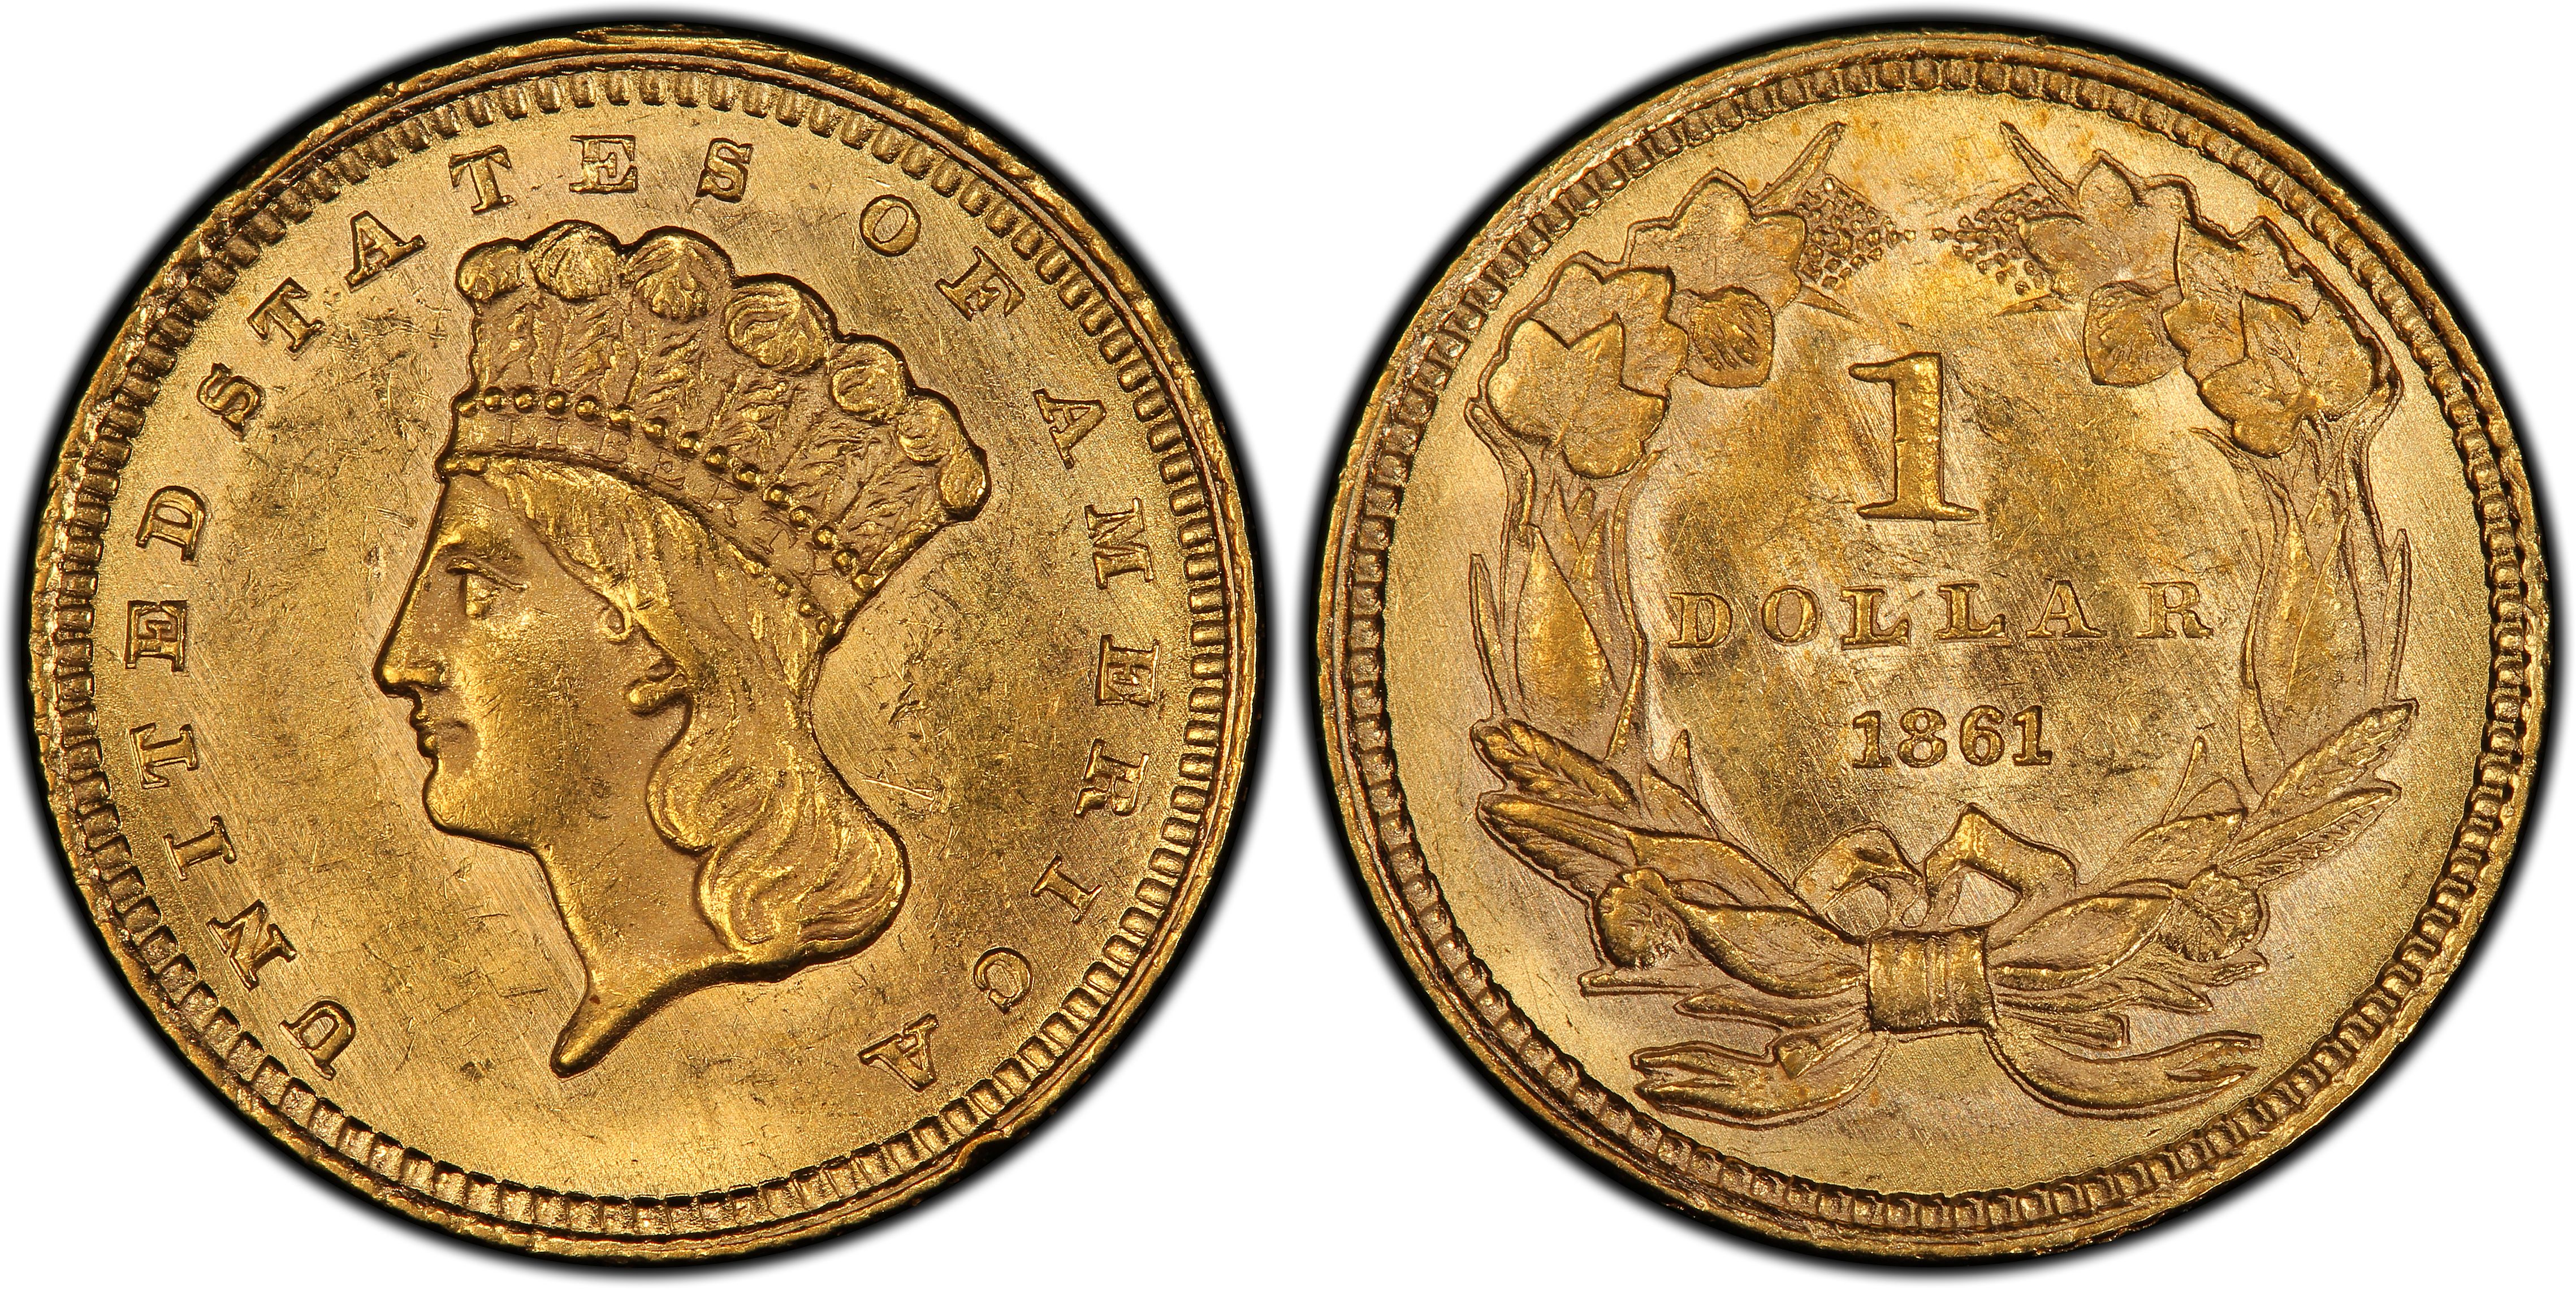 Images of Gold Dollar 1861 G$1 - PCGS CoinFacts